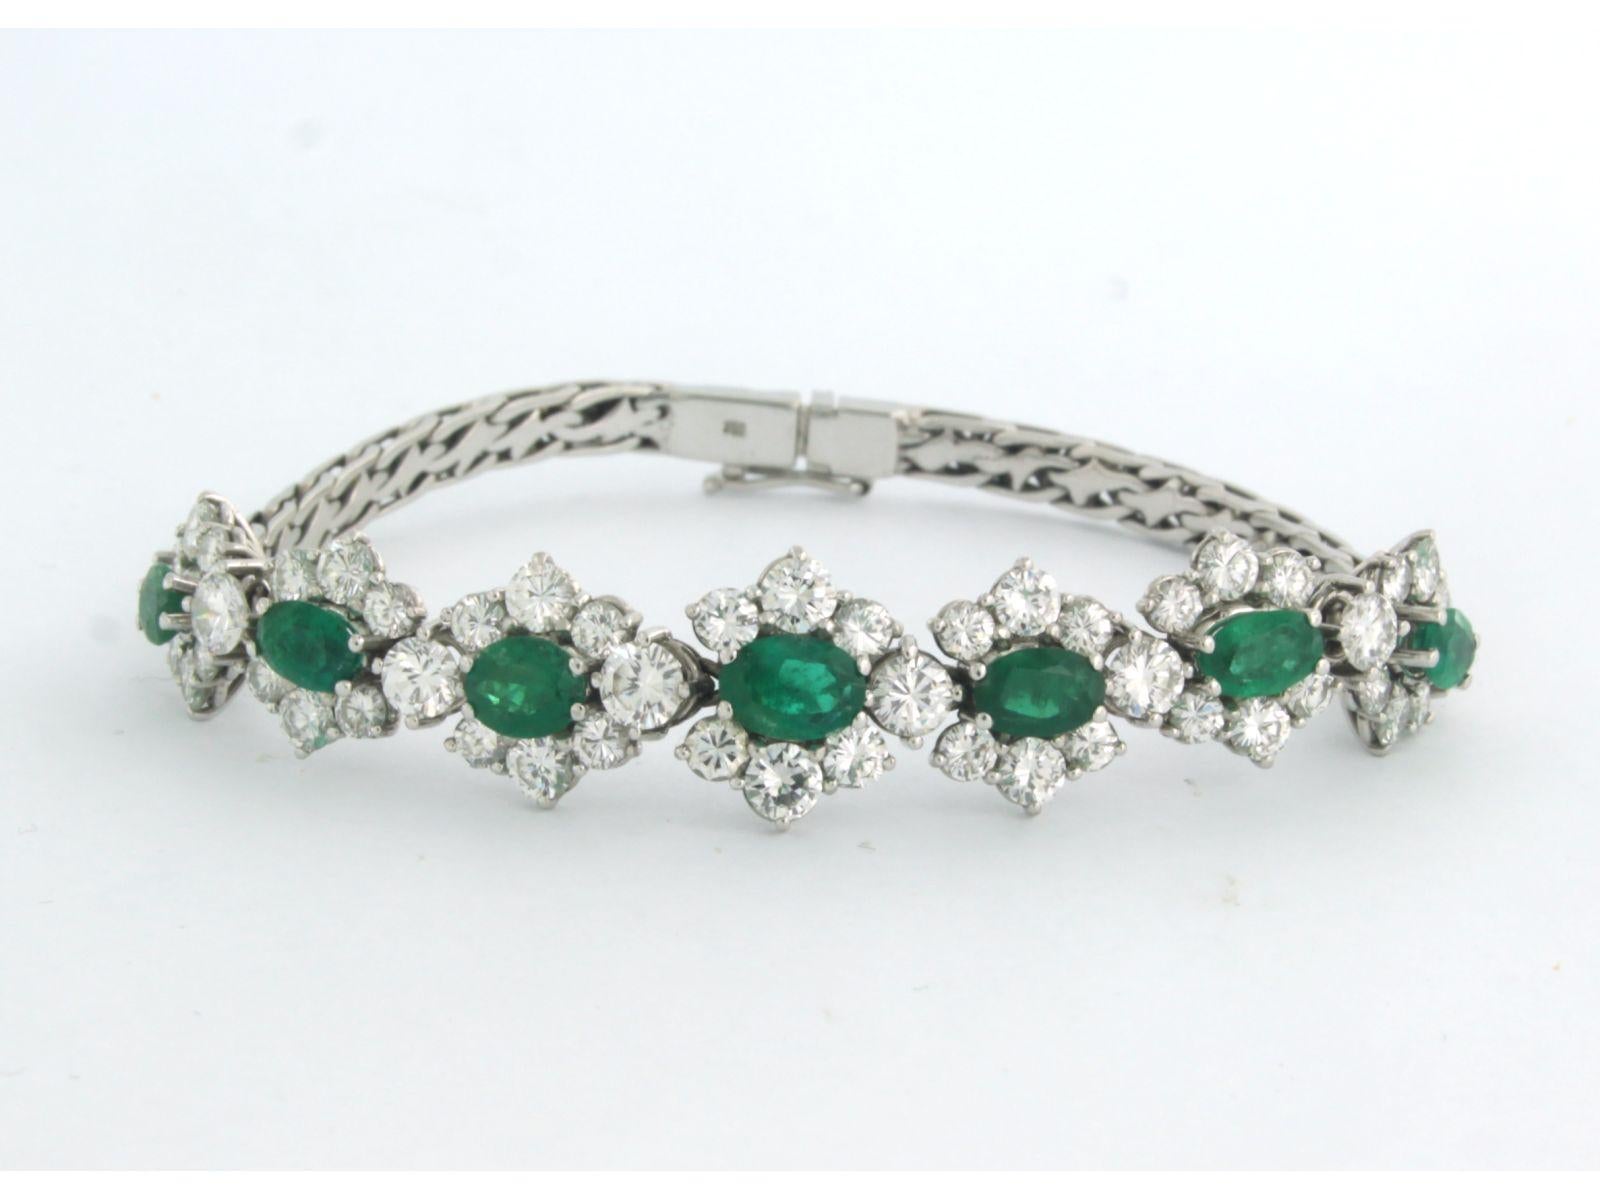 18k white gold bracelet set with emerald to. 3.50ct and brilliant cut diamonds up to. 6.00ct - F/G - VS/SI - 16 cm long

detailed description

The bracelet is 16 cm long by 3.6 mm wide

the center piece of the bracelet is 7.2 cm long by 1.2 cm